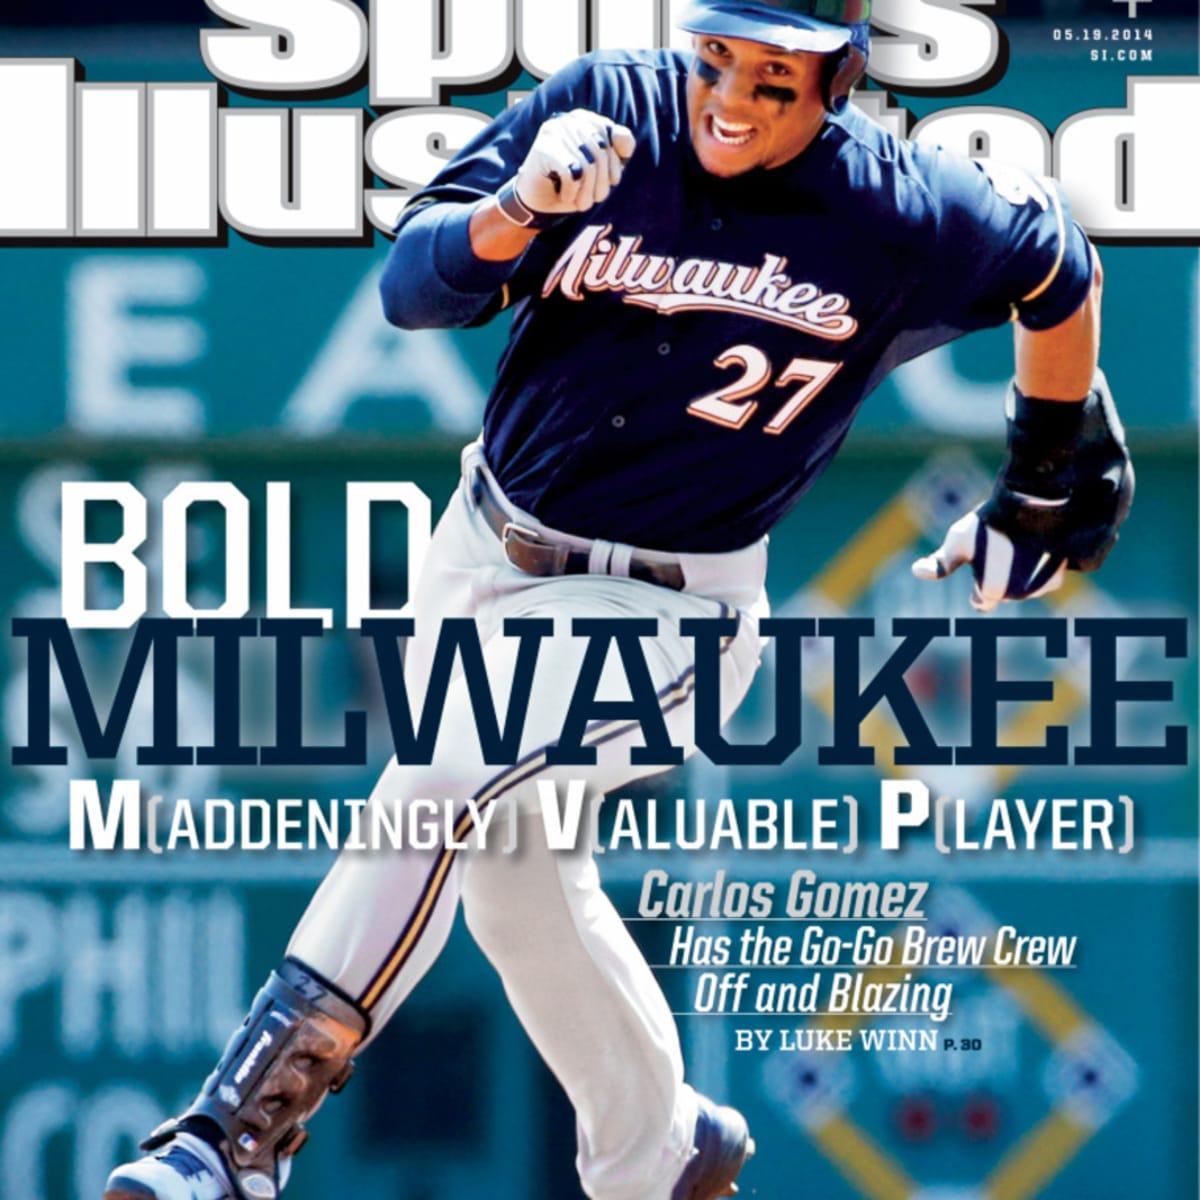 Carlos Gomez lands regional cover of May 19 issue of Sports Illustrated - Sports  Illustrated